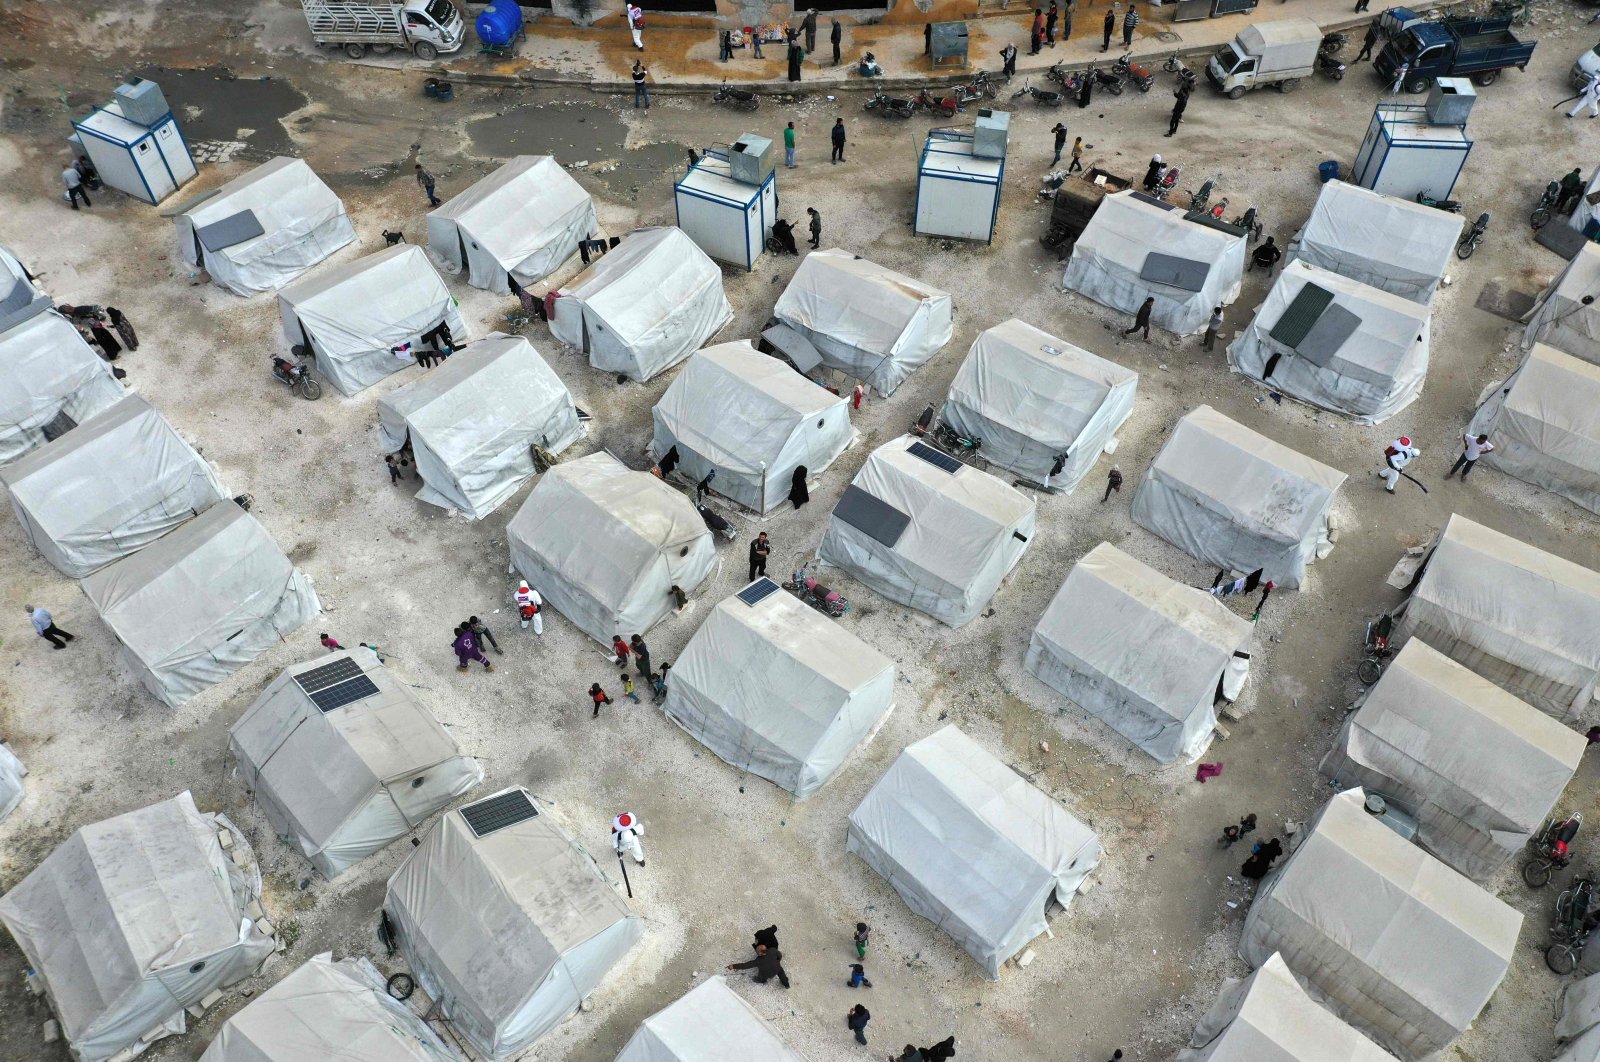 A drone image taken on April 9, 2020, shows sanitation workers disinfecting a camp for displaced Syrians next to the Idlib municipal stadium in the northwestern Syrian city, during a campaign to limit the spread of the coronavirus pandemic. (AFP Photo)